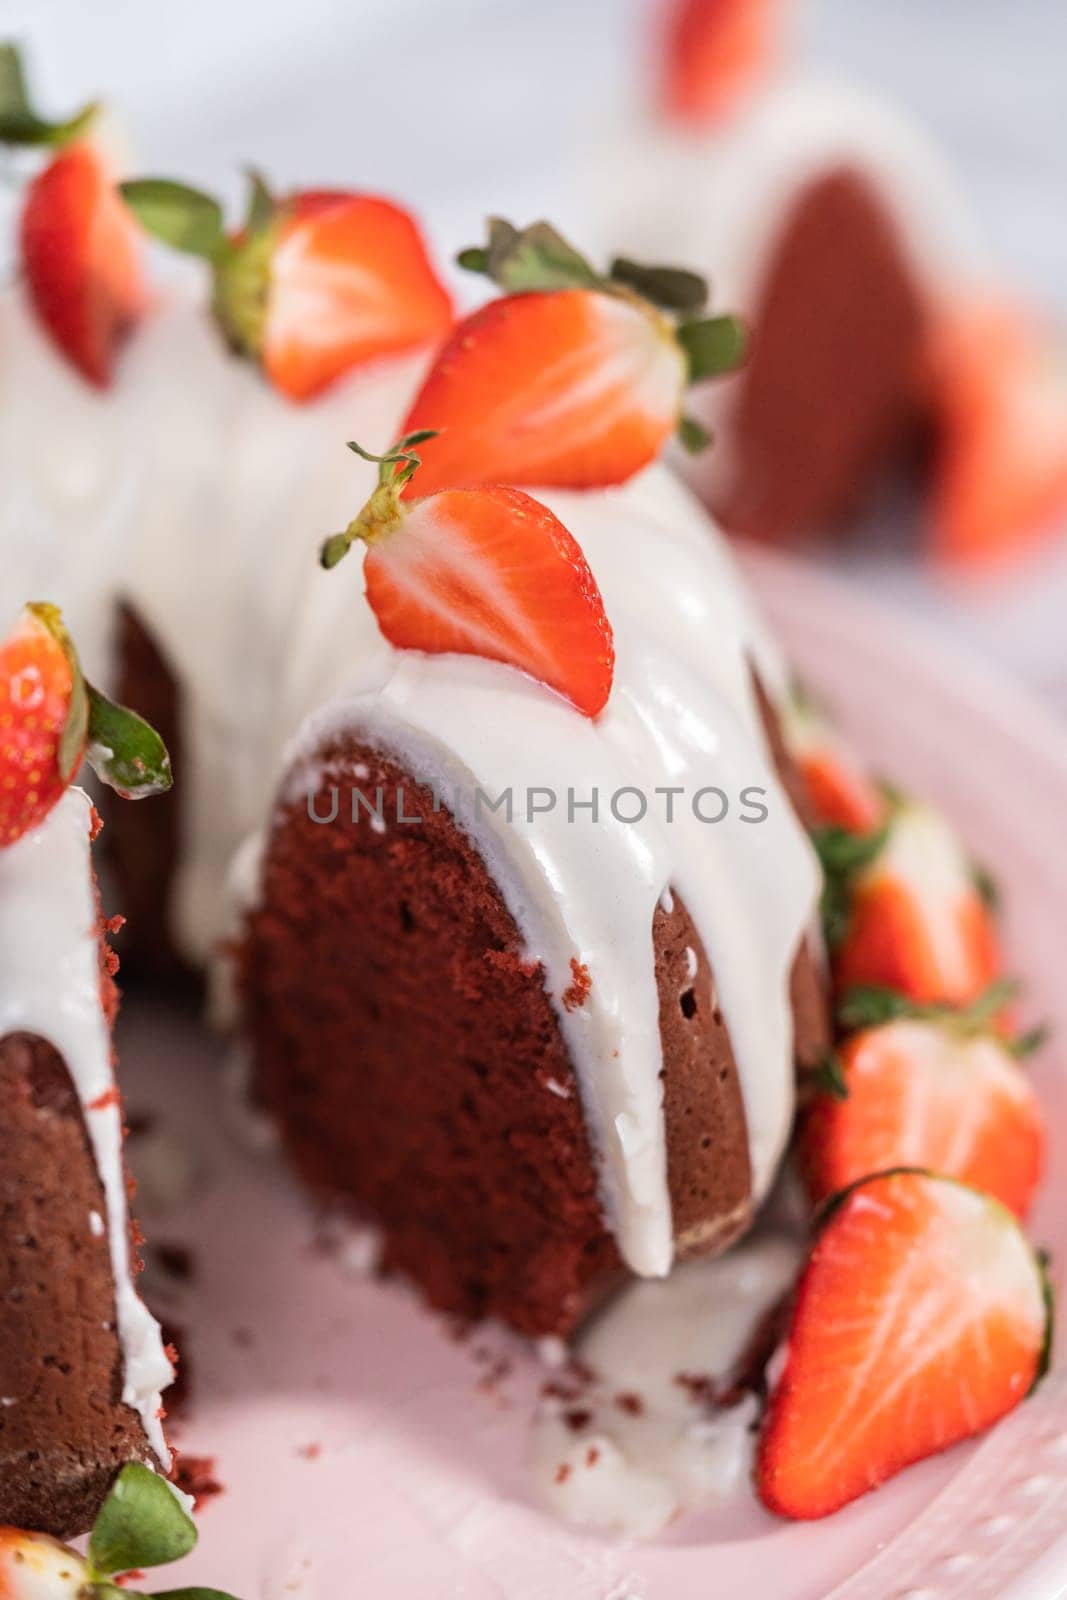 Slicing red velvet bundt cake with cream cheese frosting garnished with fresh strawberries.